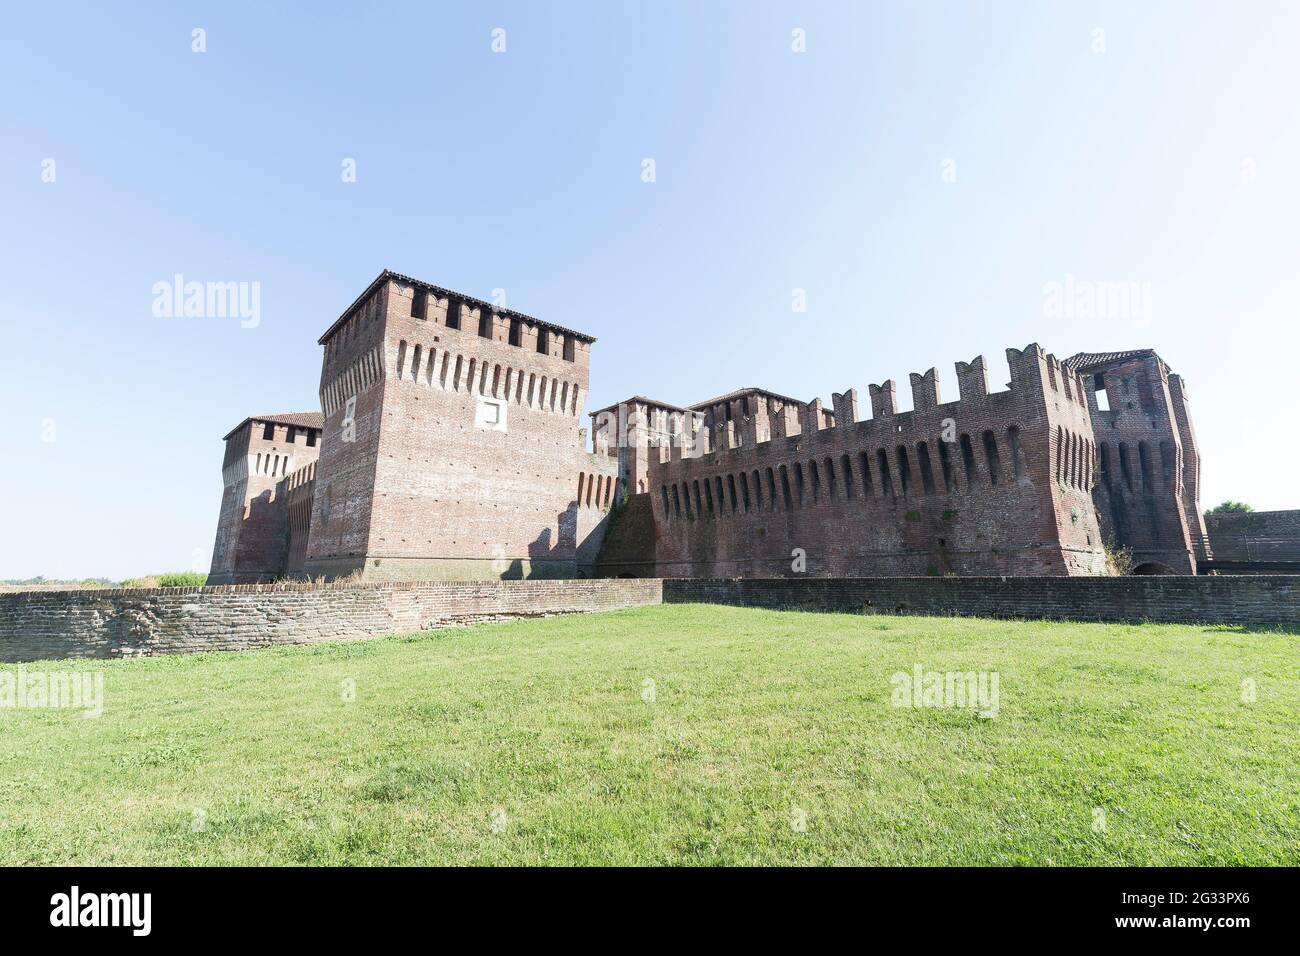 Soncino, Italy - 2021, June 13: exterior view of Castello Visconteo in Soncino, ITaly. No people are visible, shot is taken during a bright and sunny Stock Photo